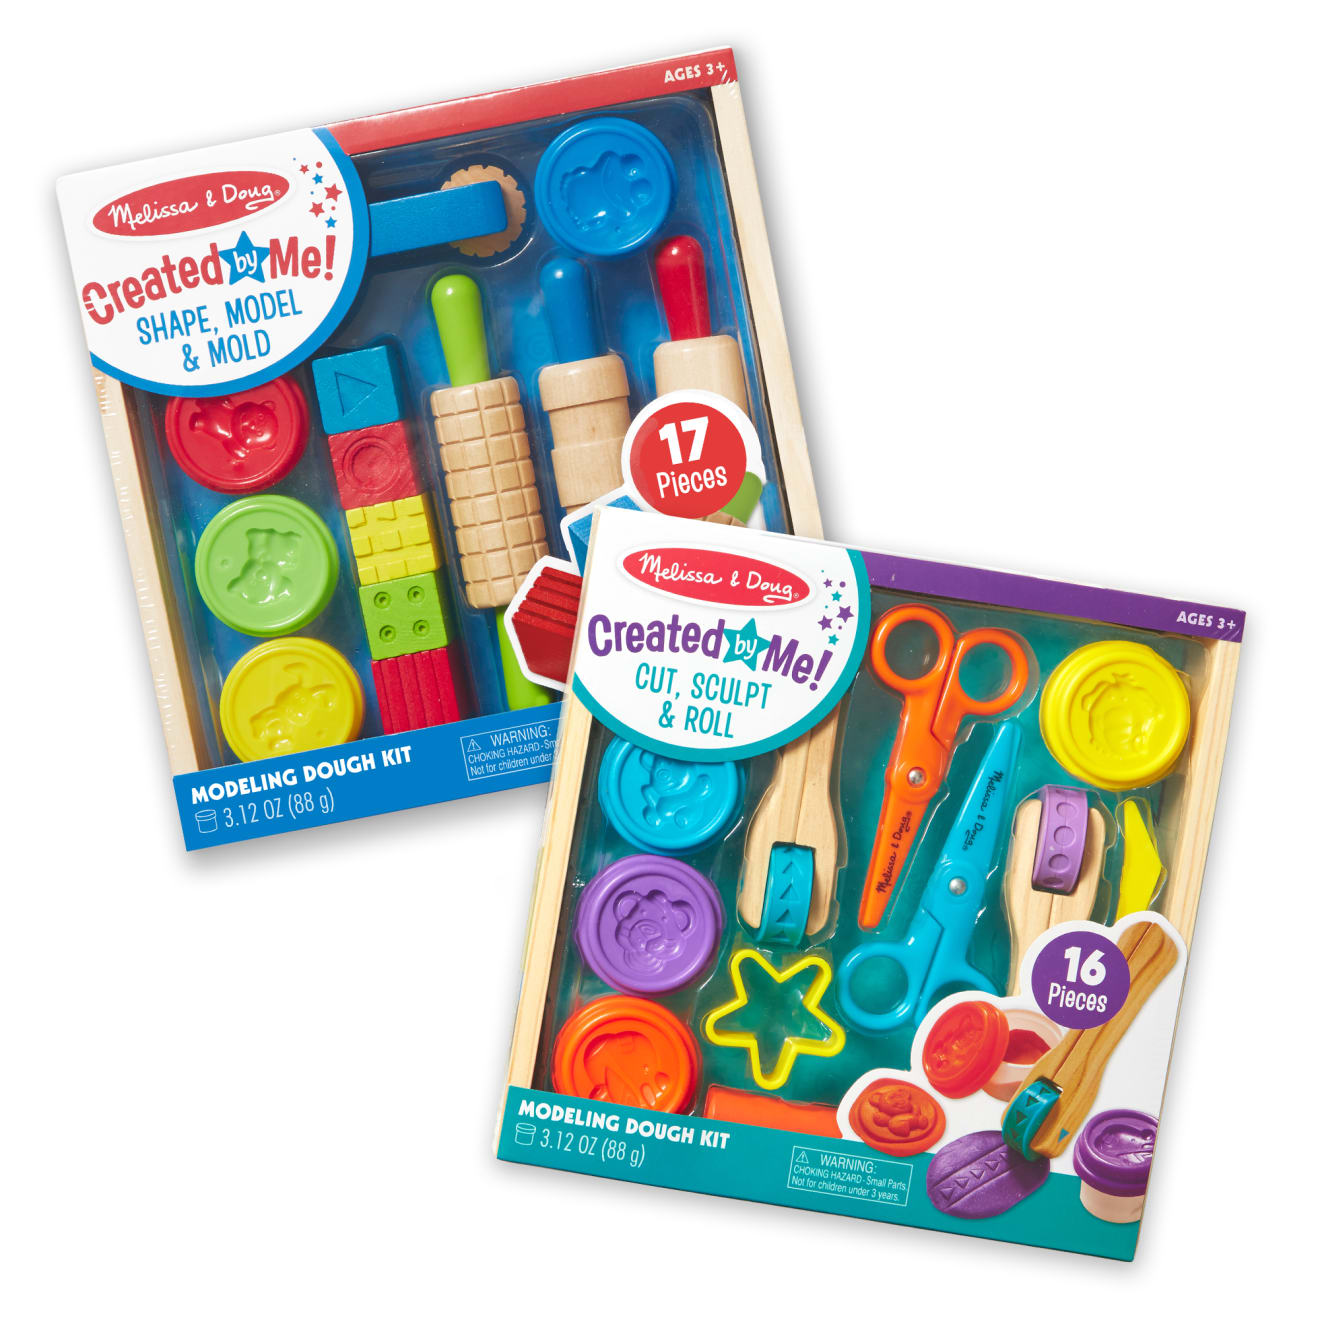  Melissa & Doug Shape, Model, and Mold Clay Activity Set - 4  Tubs of Modeling Dough and Tools - Arts And Crafts For Kids Ages 3+ :  Melissa & Doug: Toys & Games